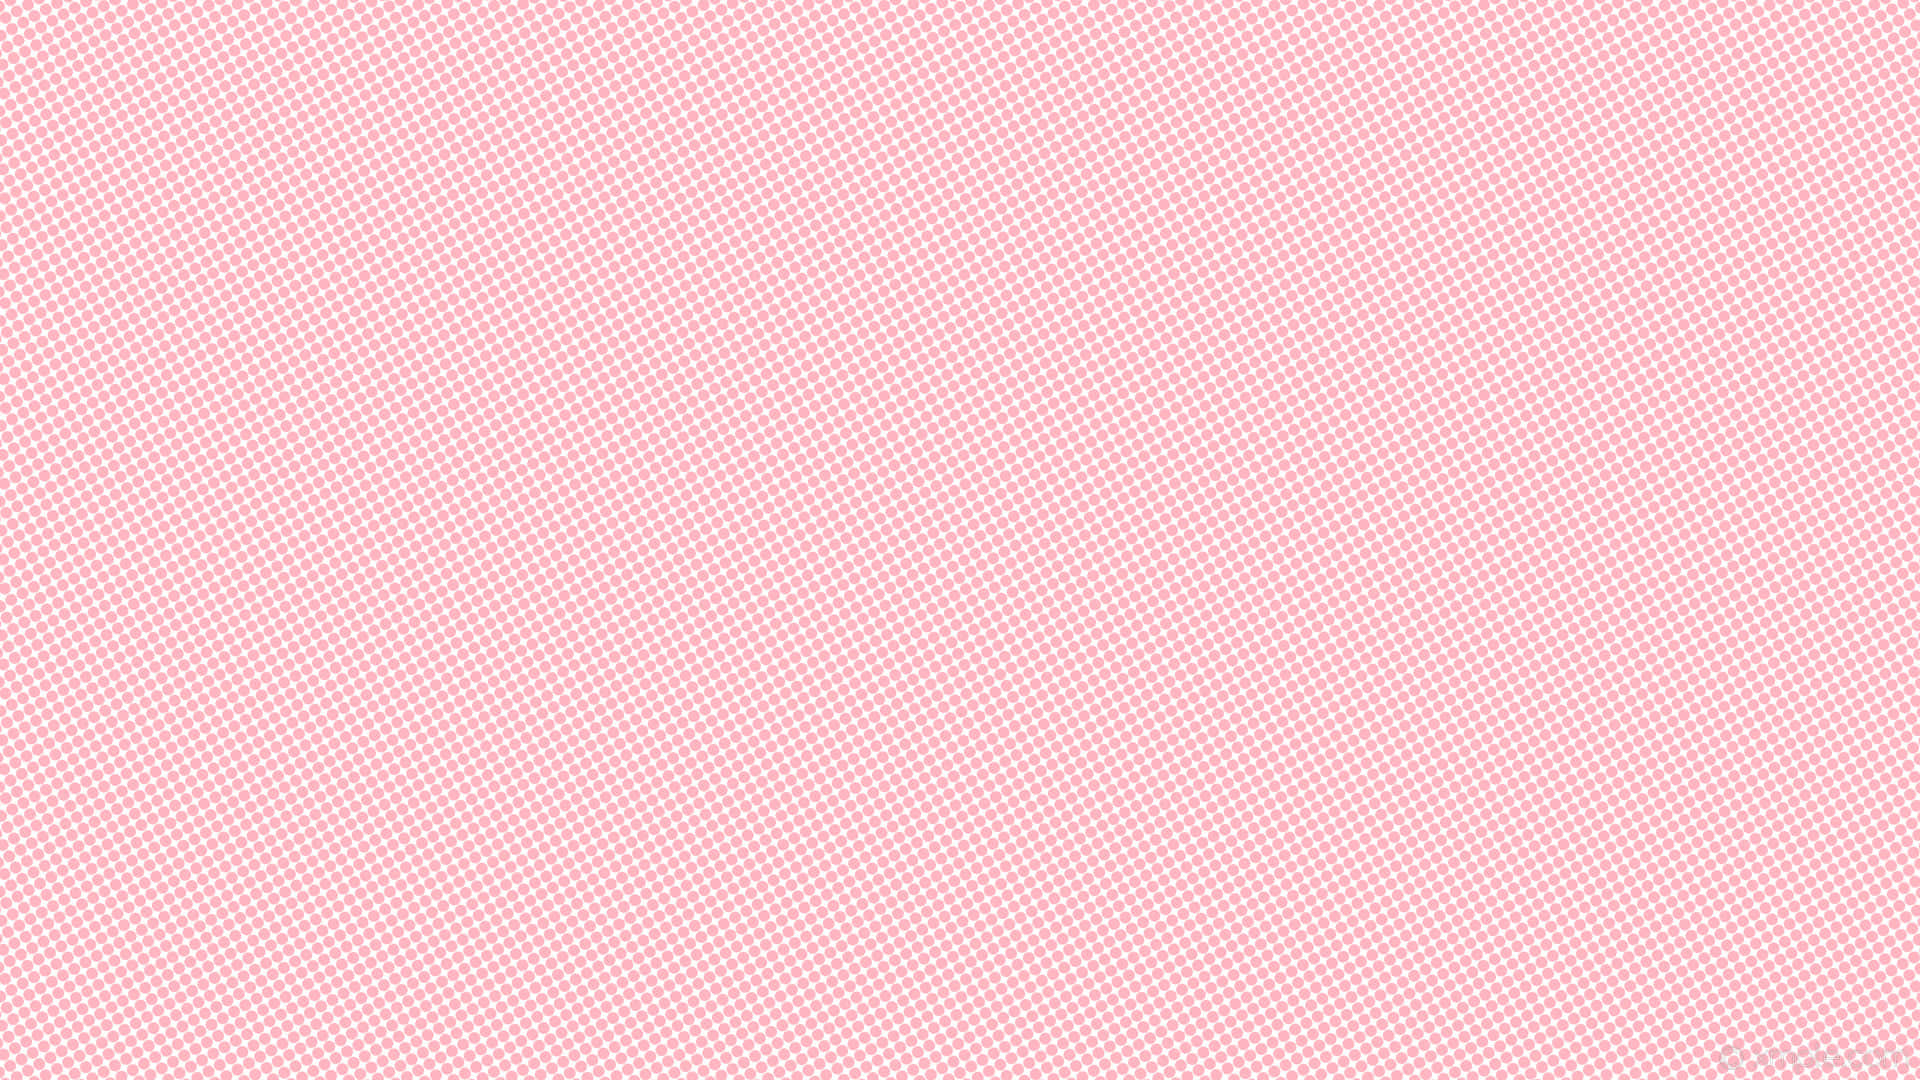 Free Solid Pink Wallpaper Downloads, [100+] Solid Pink Wallpapers for FREE  